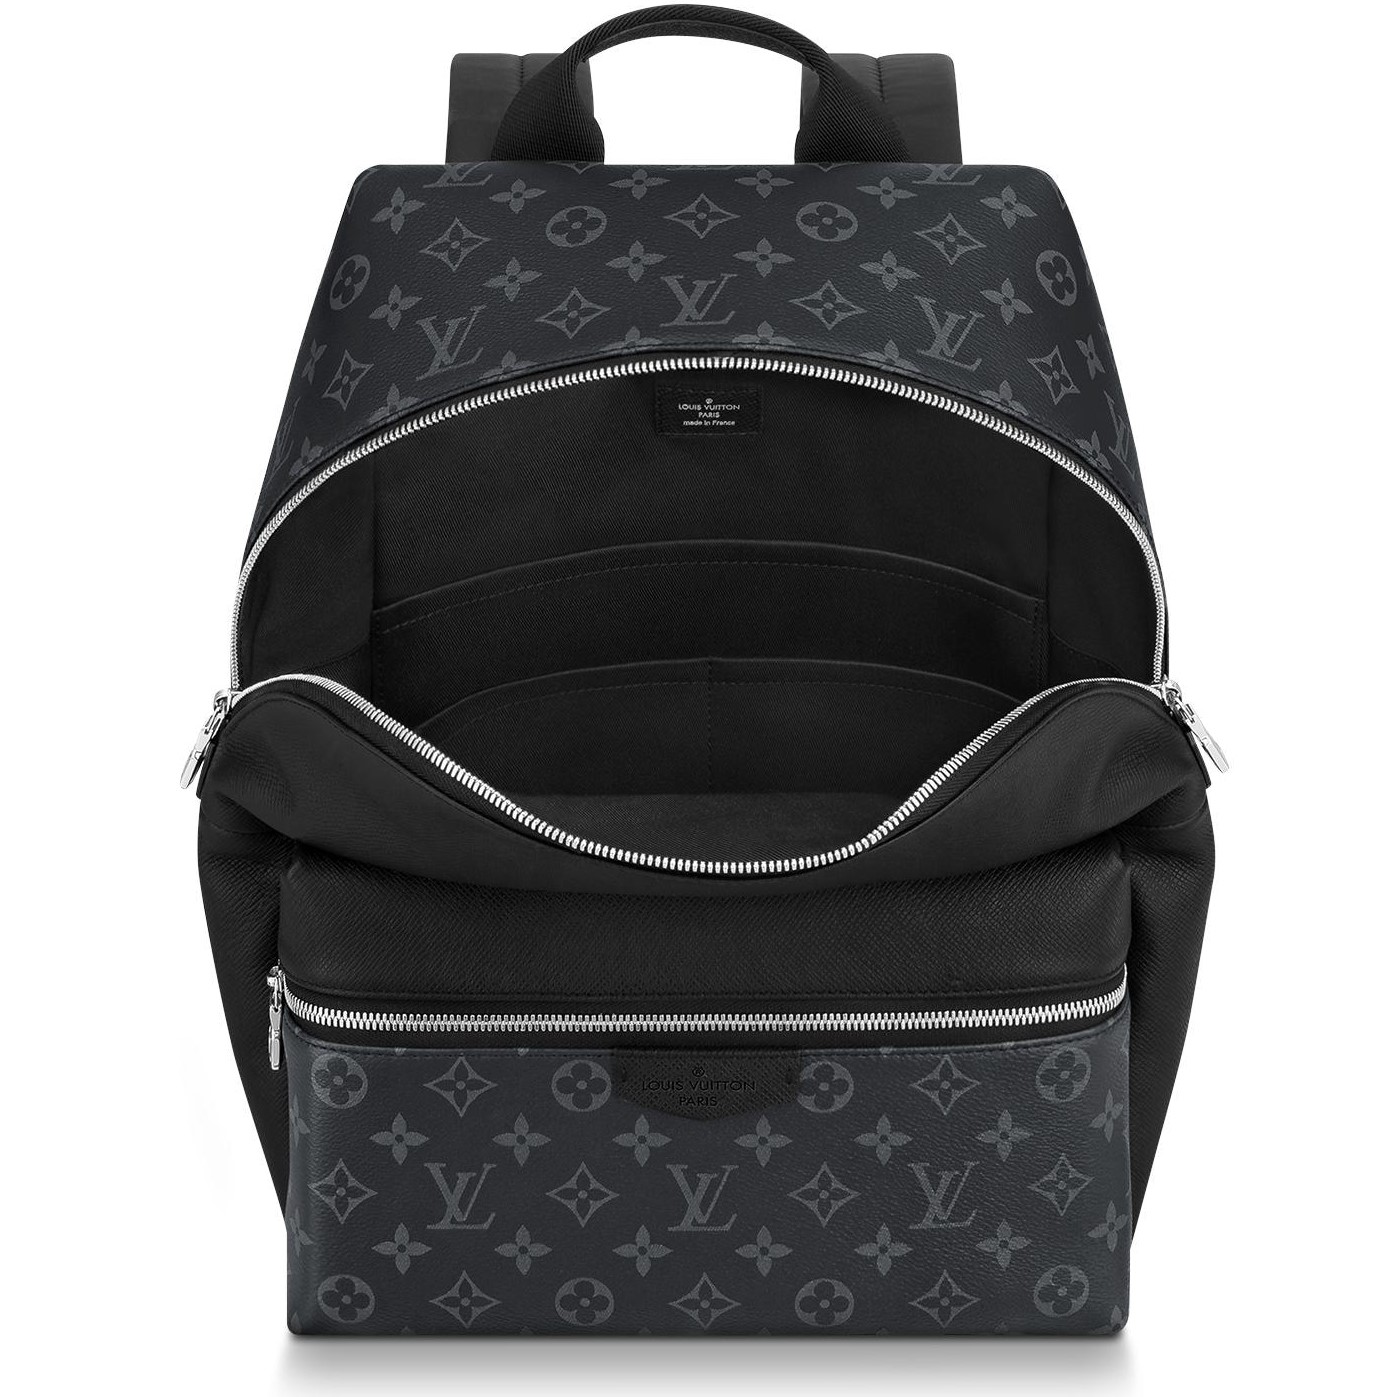 BALO UNISEX LOUIS VUITTON DISCOVERY BACKPACK PM TAIGARAMA 9